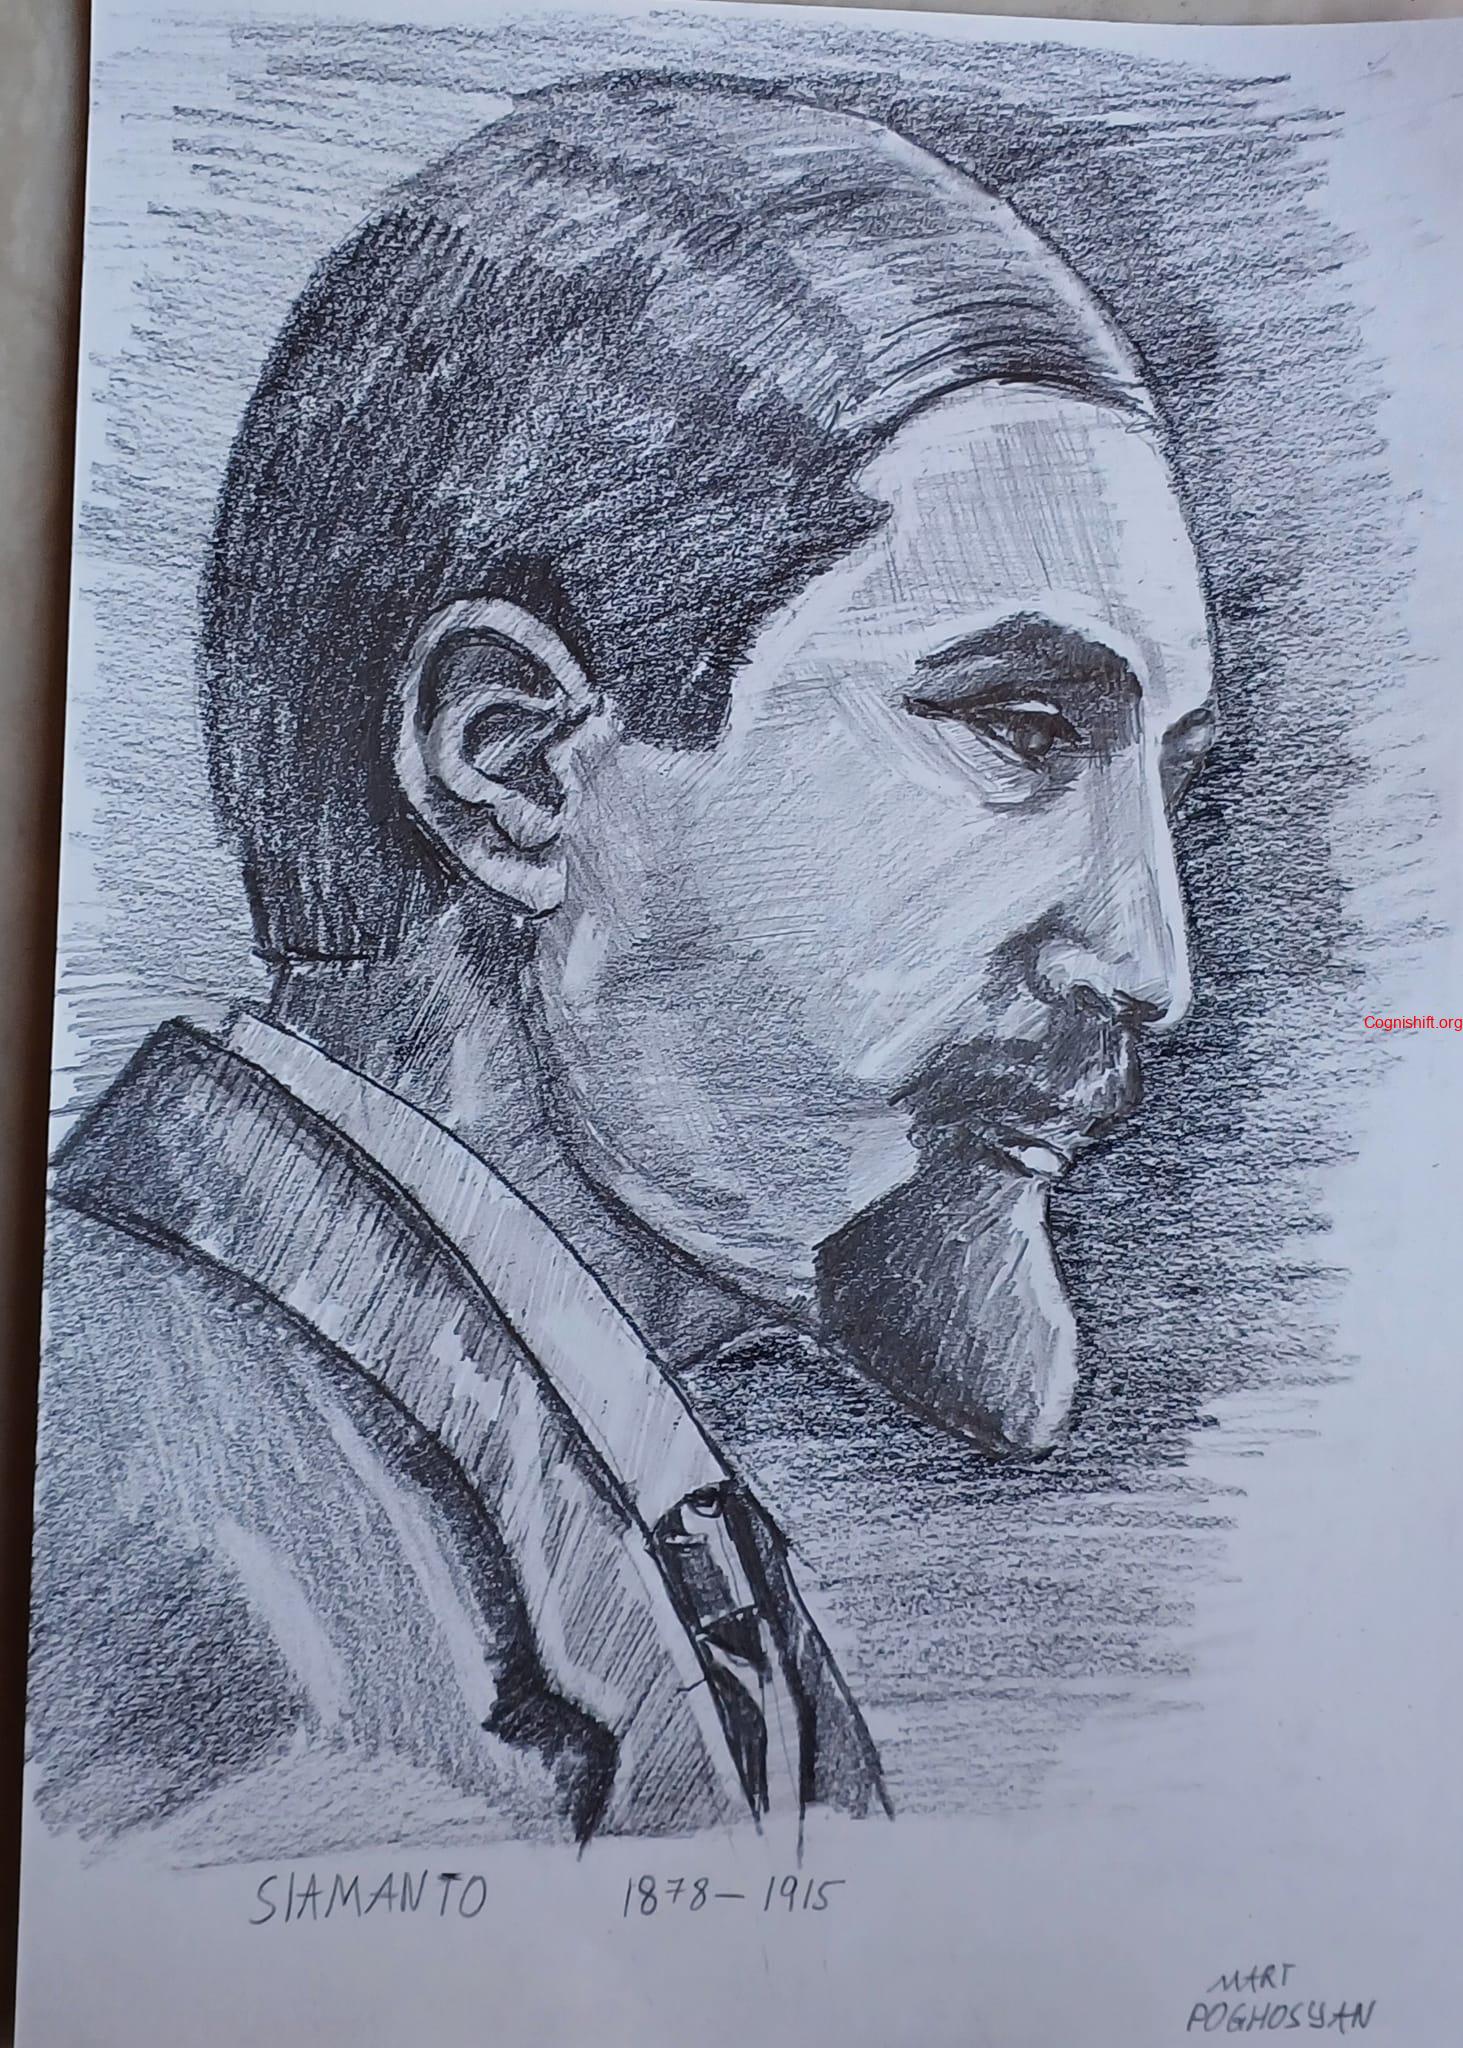 Pencil sketch SIAMANTO - great Armenian Siamanto, was an influential Armenian writer, poet and national figure from the late 19th century and early 20th century.